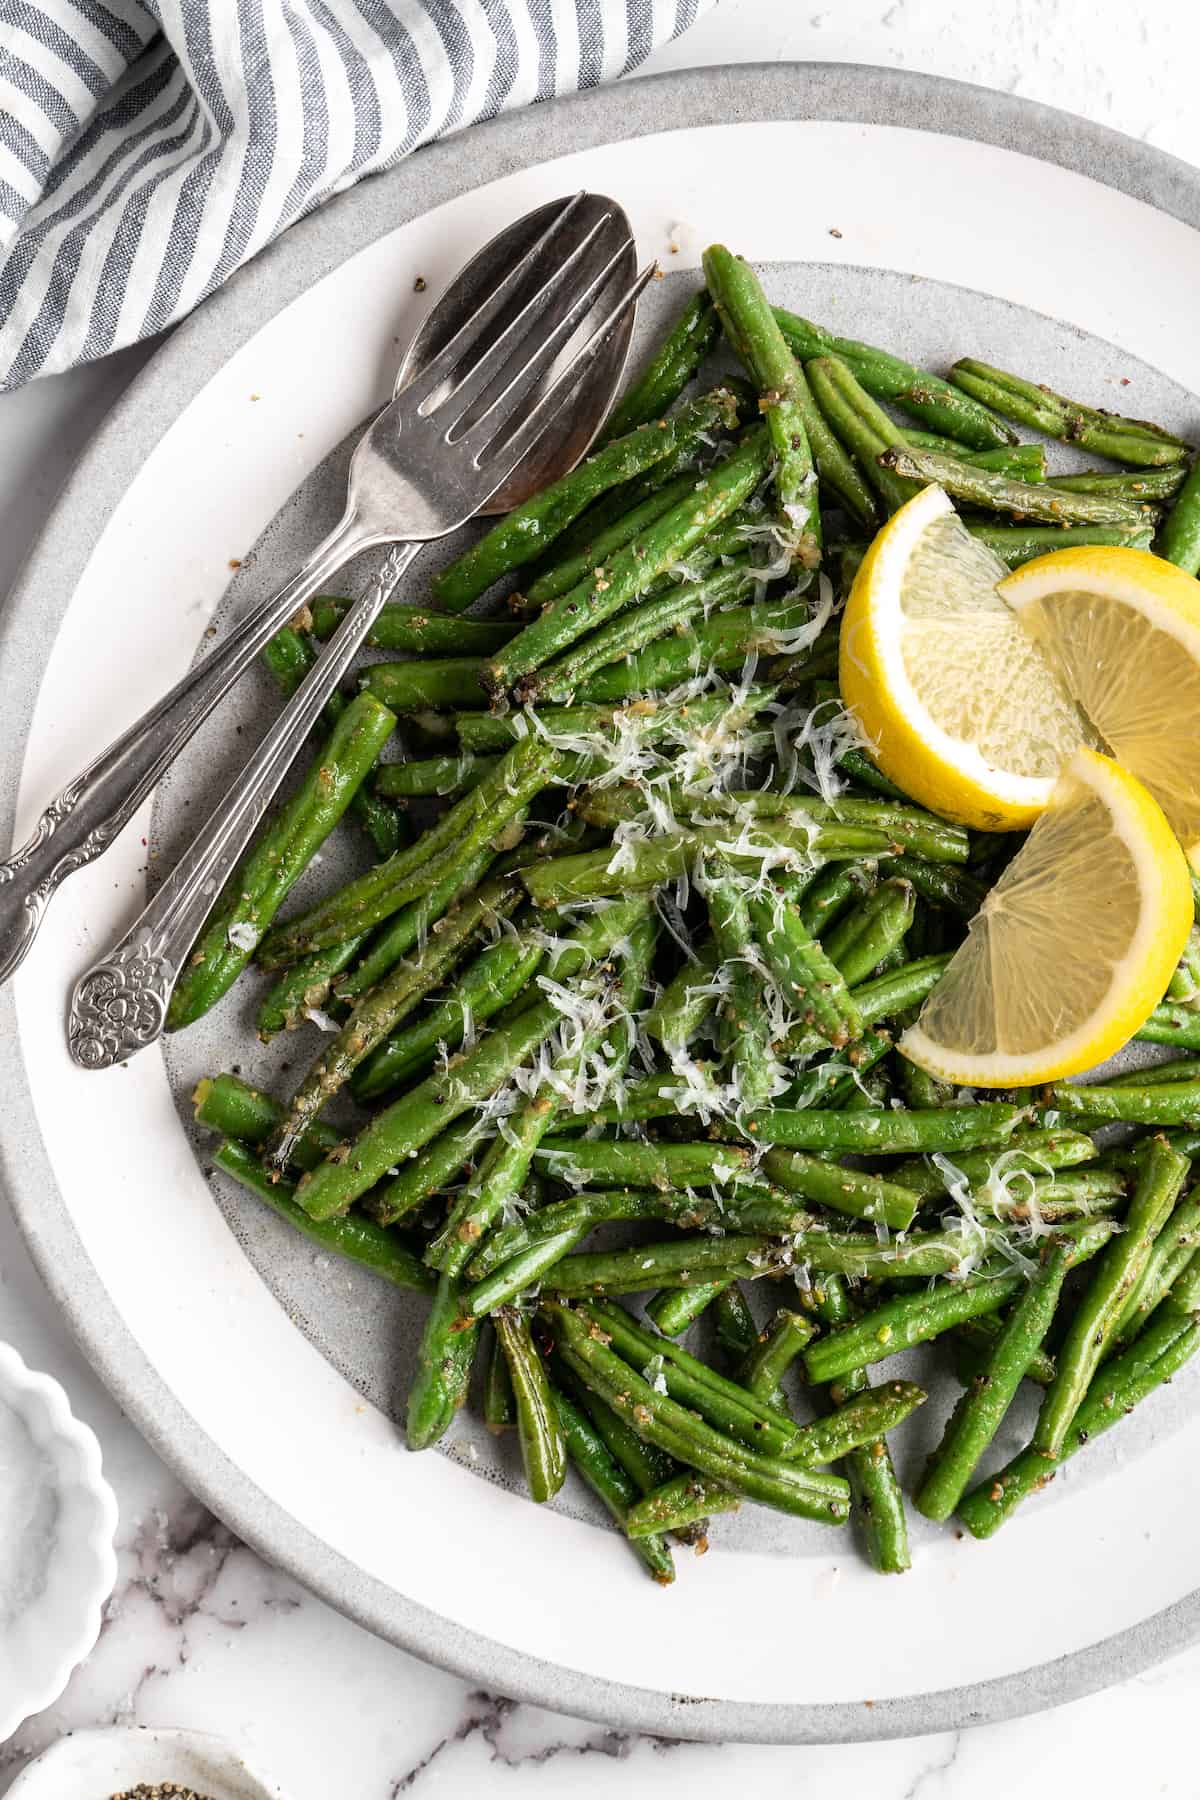 Air fryer green beans on plate with spoon, fork, and lemon wedges